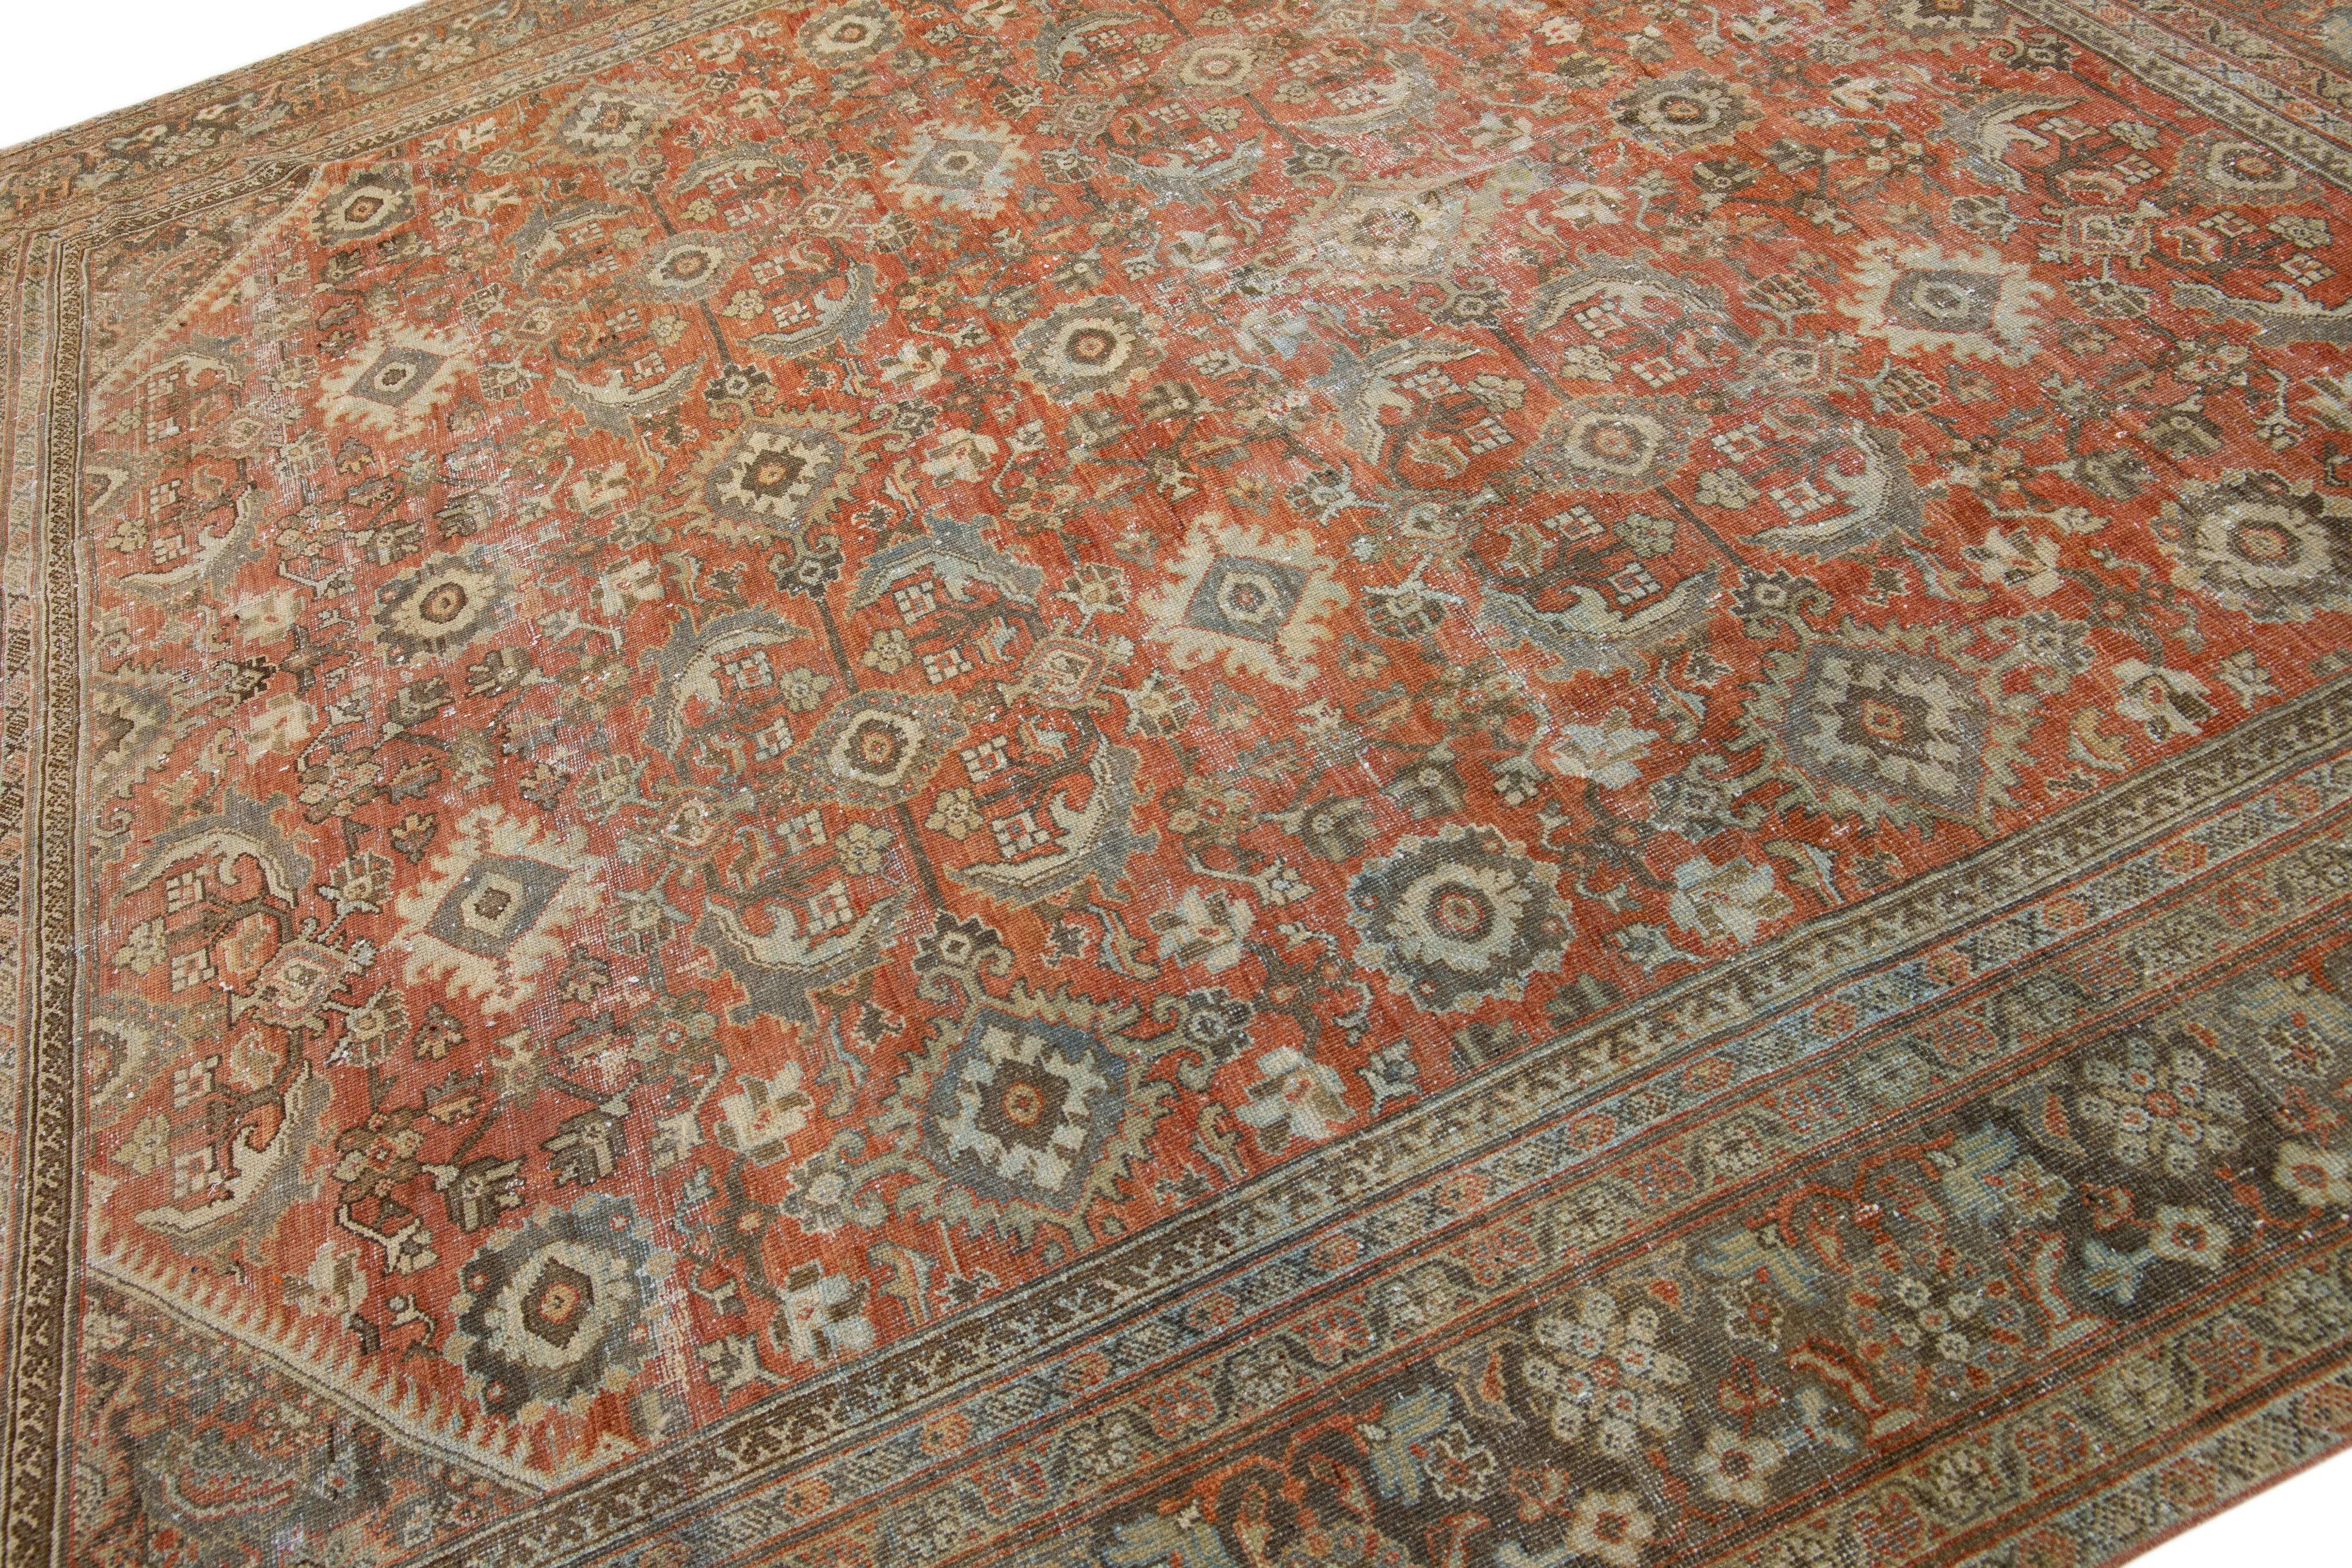 Rust Handmade Antique Persian Mahal Square Wool Rug with Allover Motif In Good Condition For Sale In Norwalk, CT